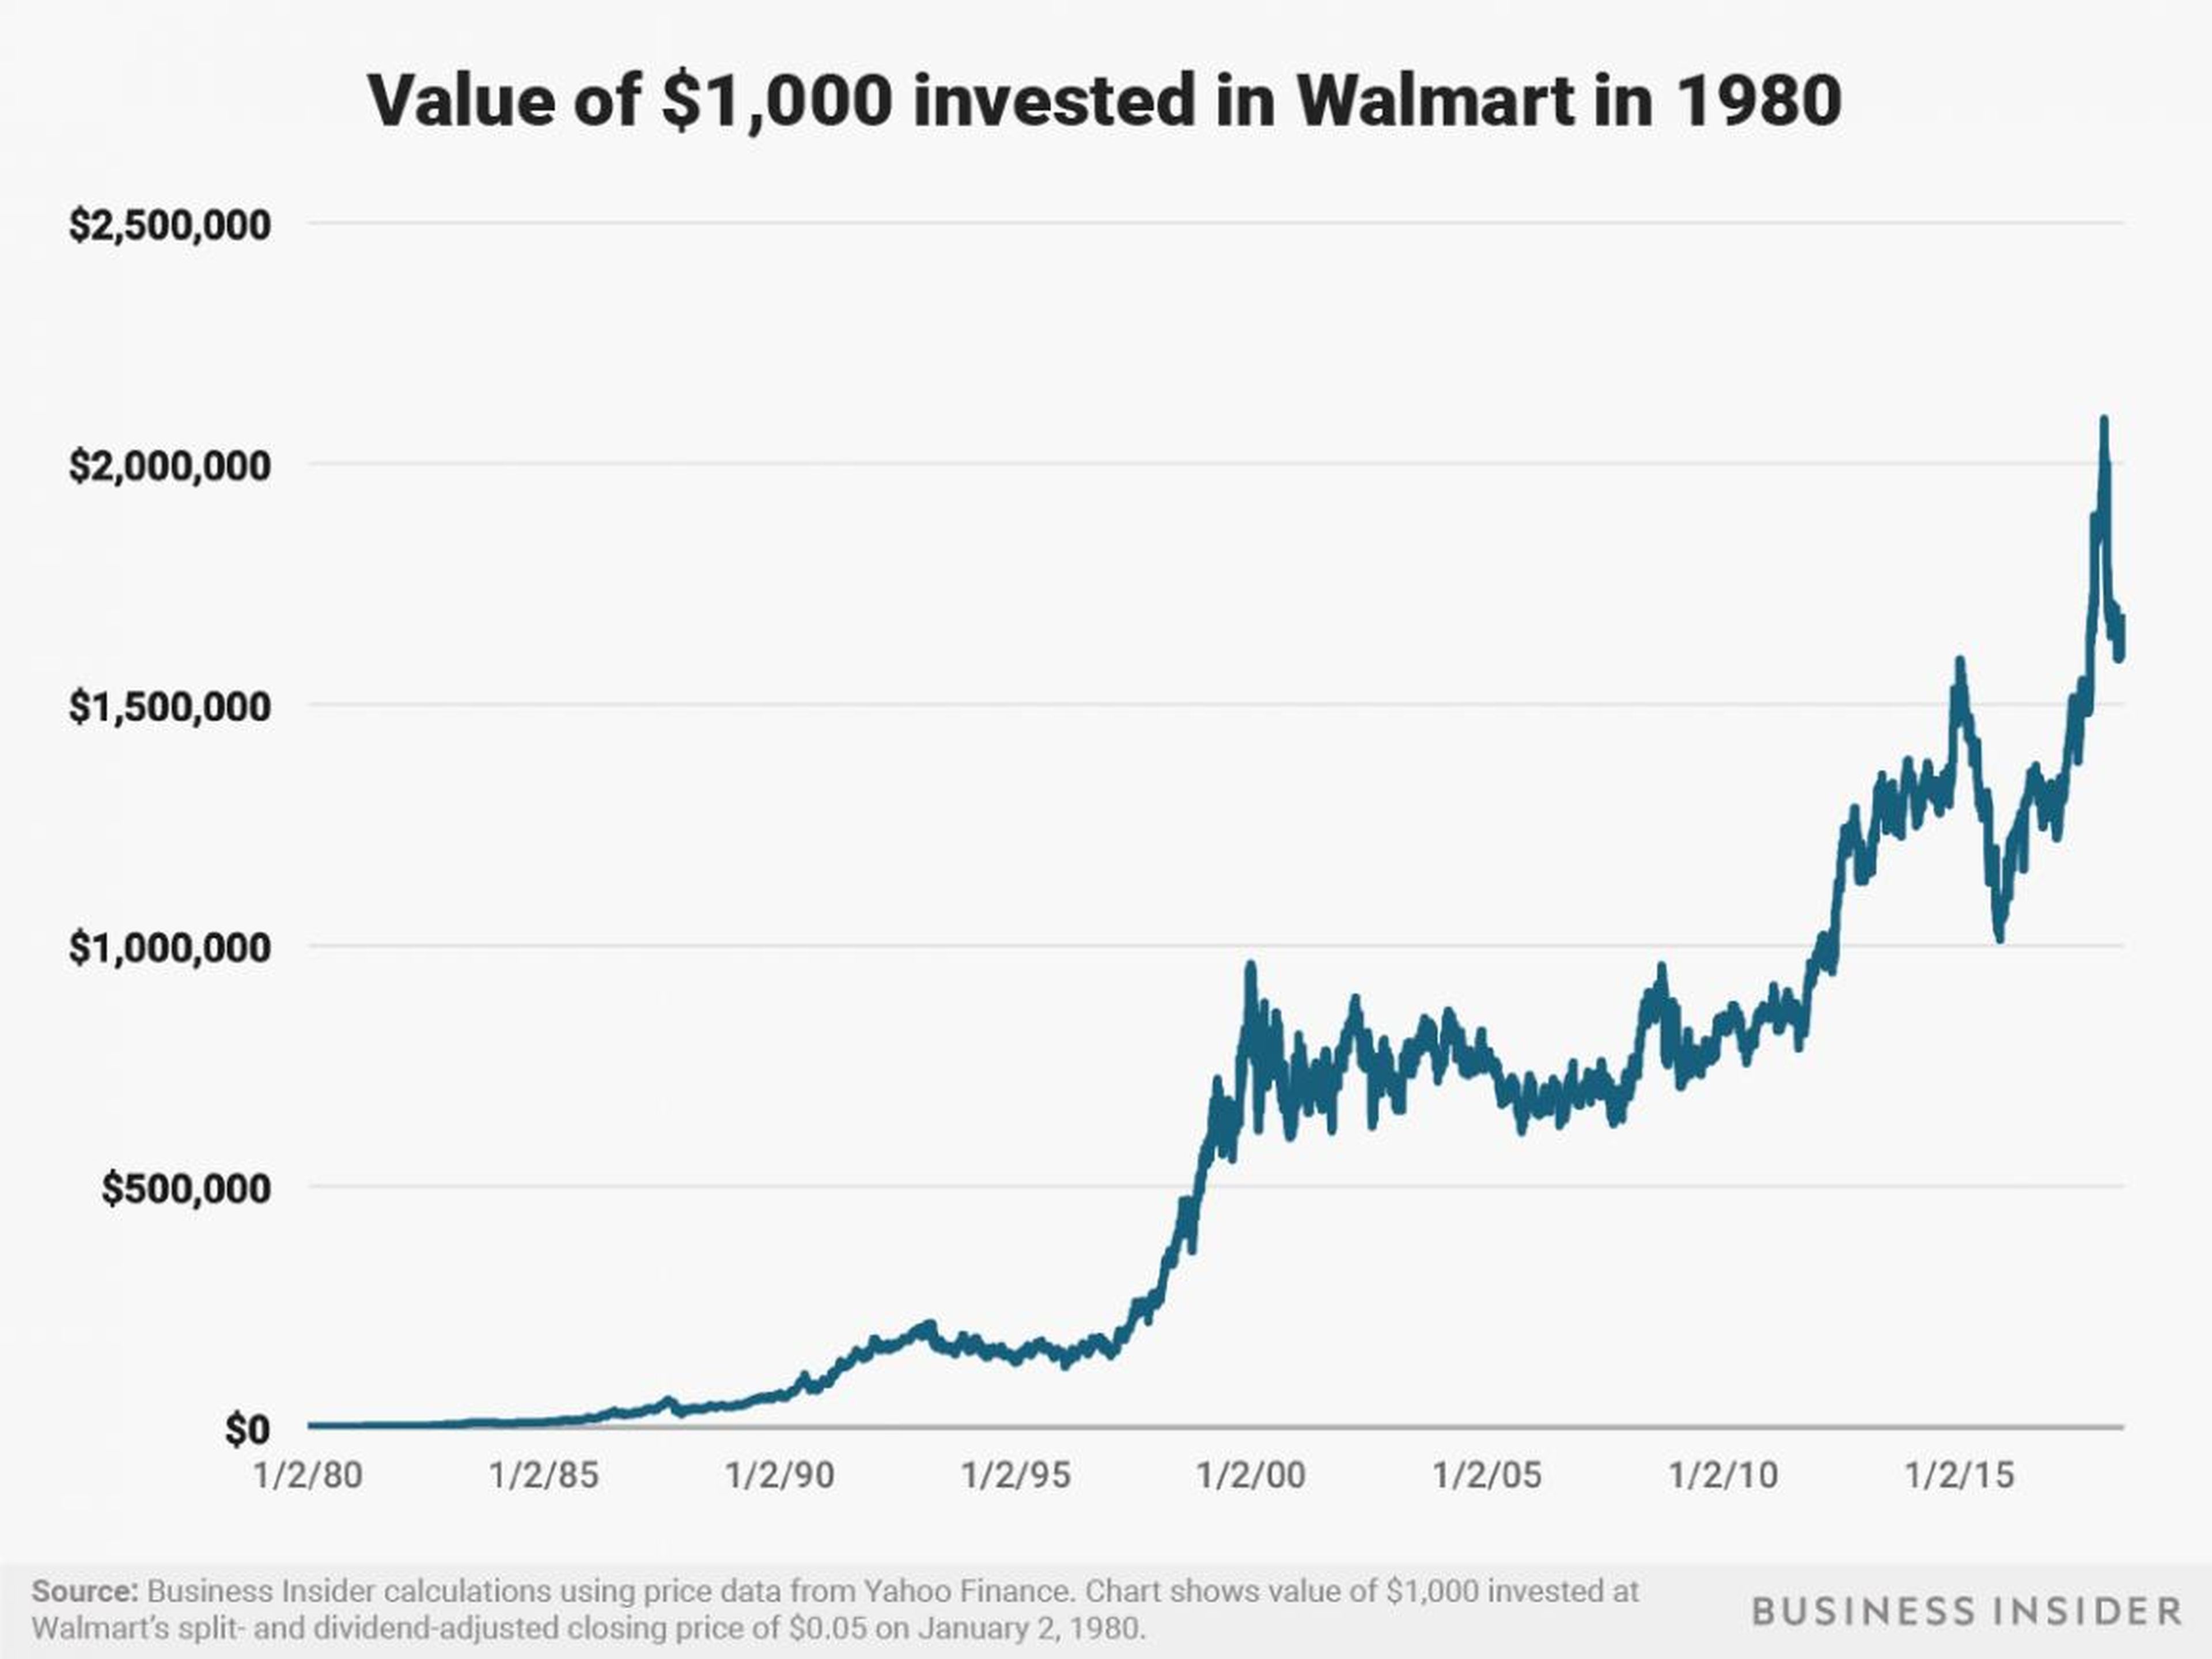 A $1,000 investment at the start of 1980 in Walmart would be worth over $1.6 million today.